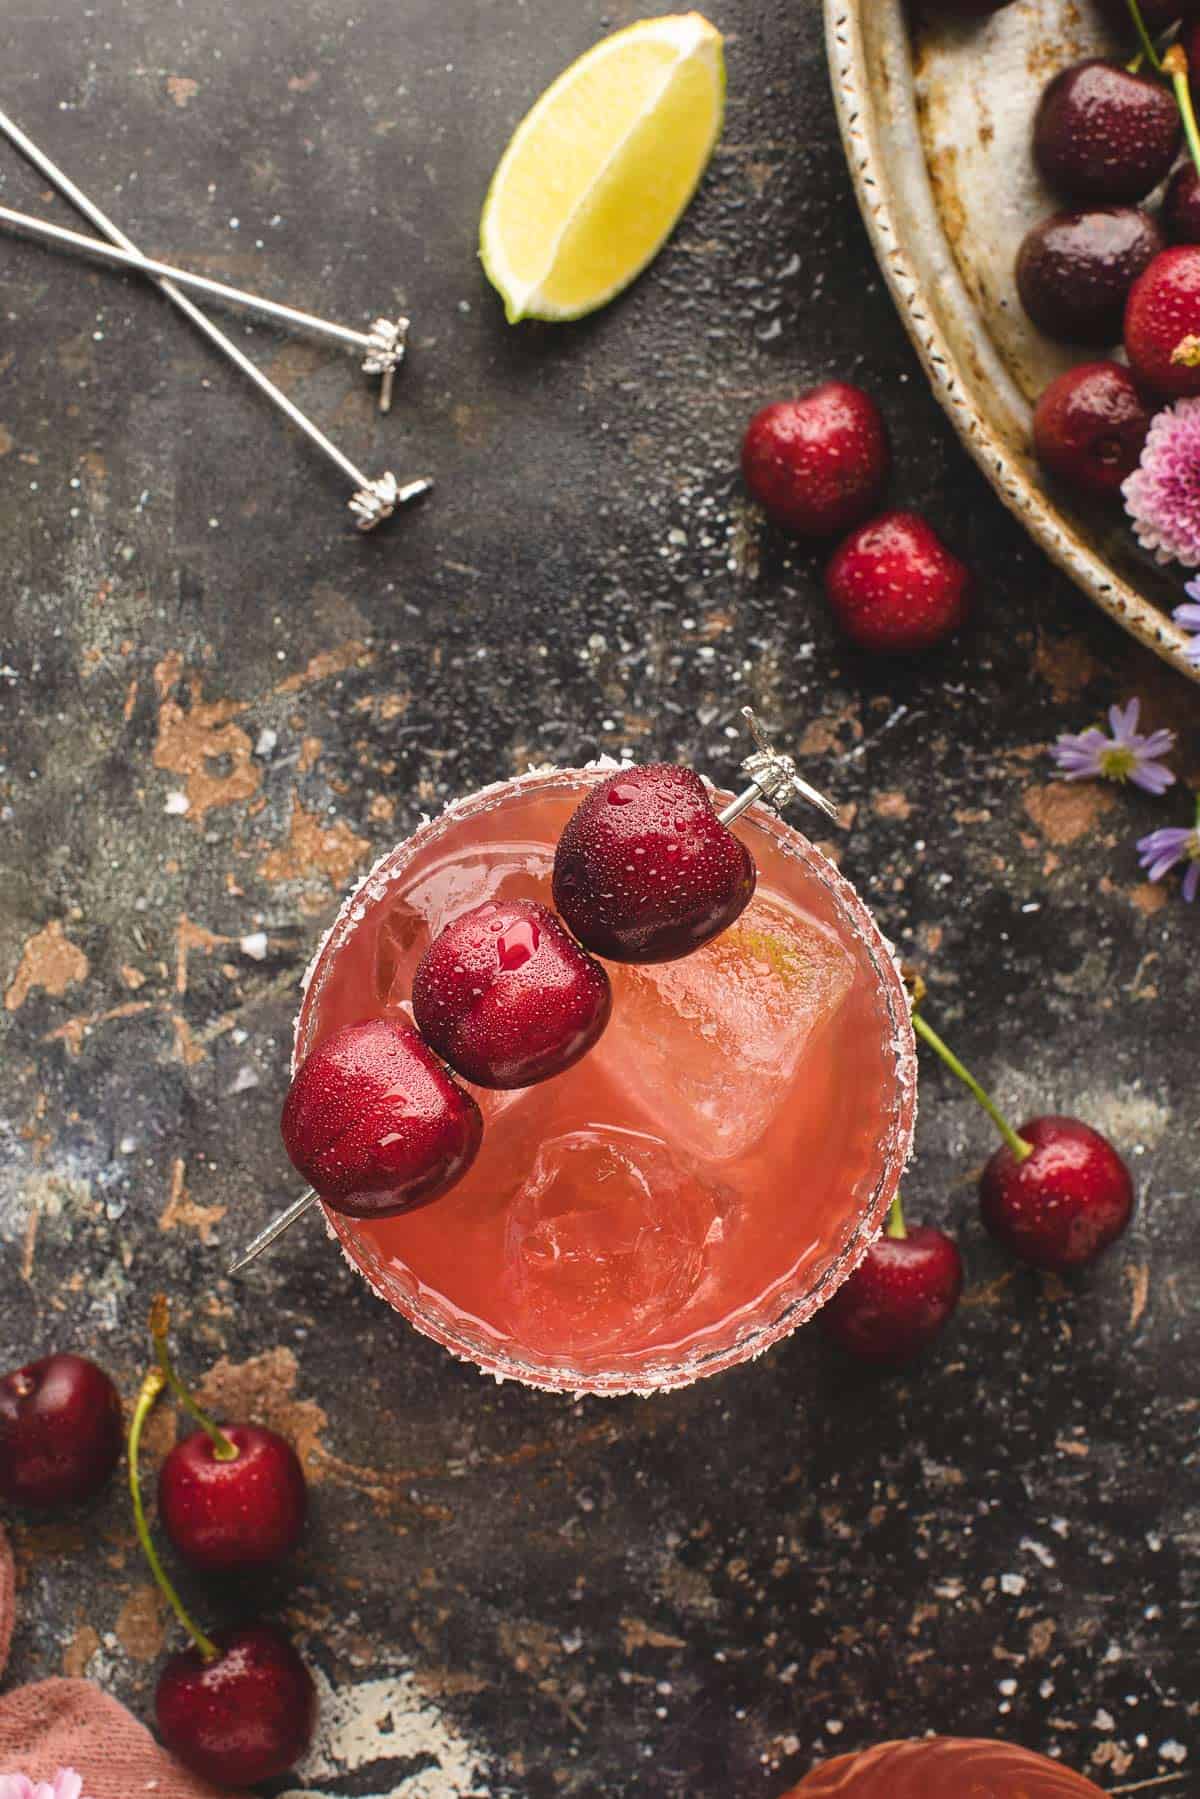 Overhead view of a cherry margarita garnished with fresh cherries.